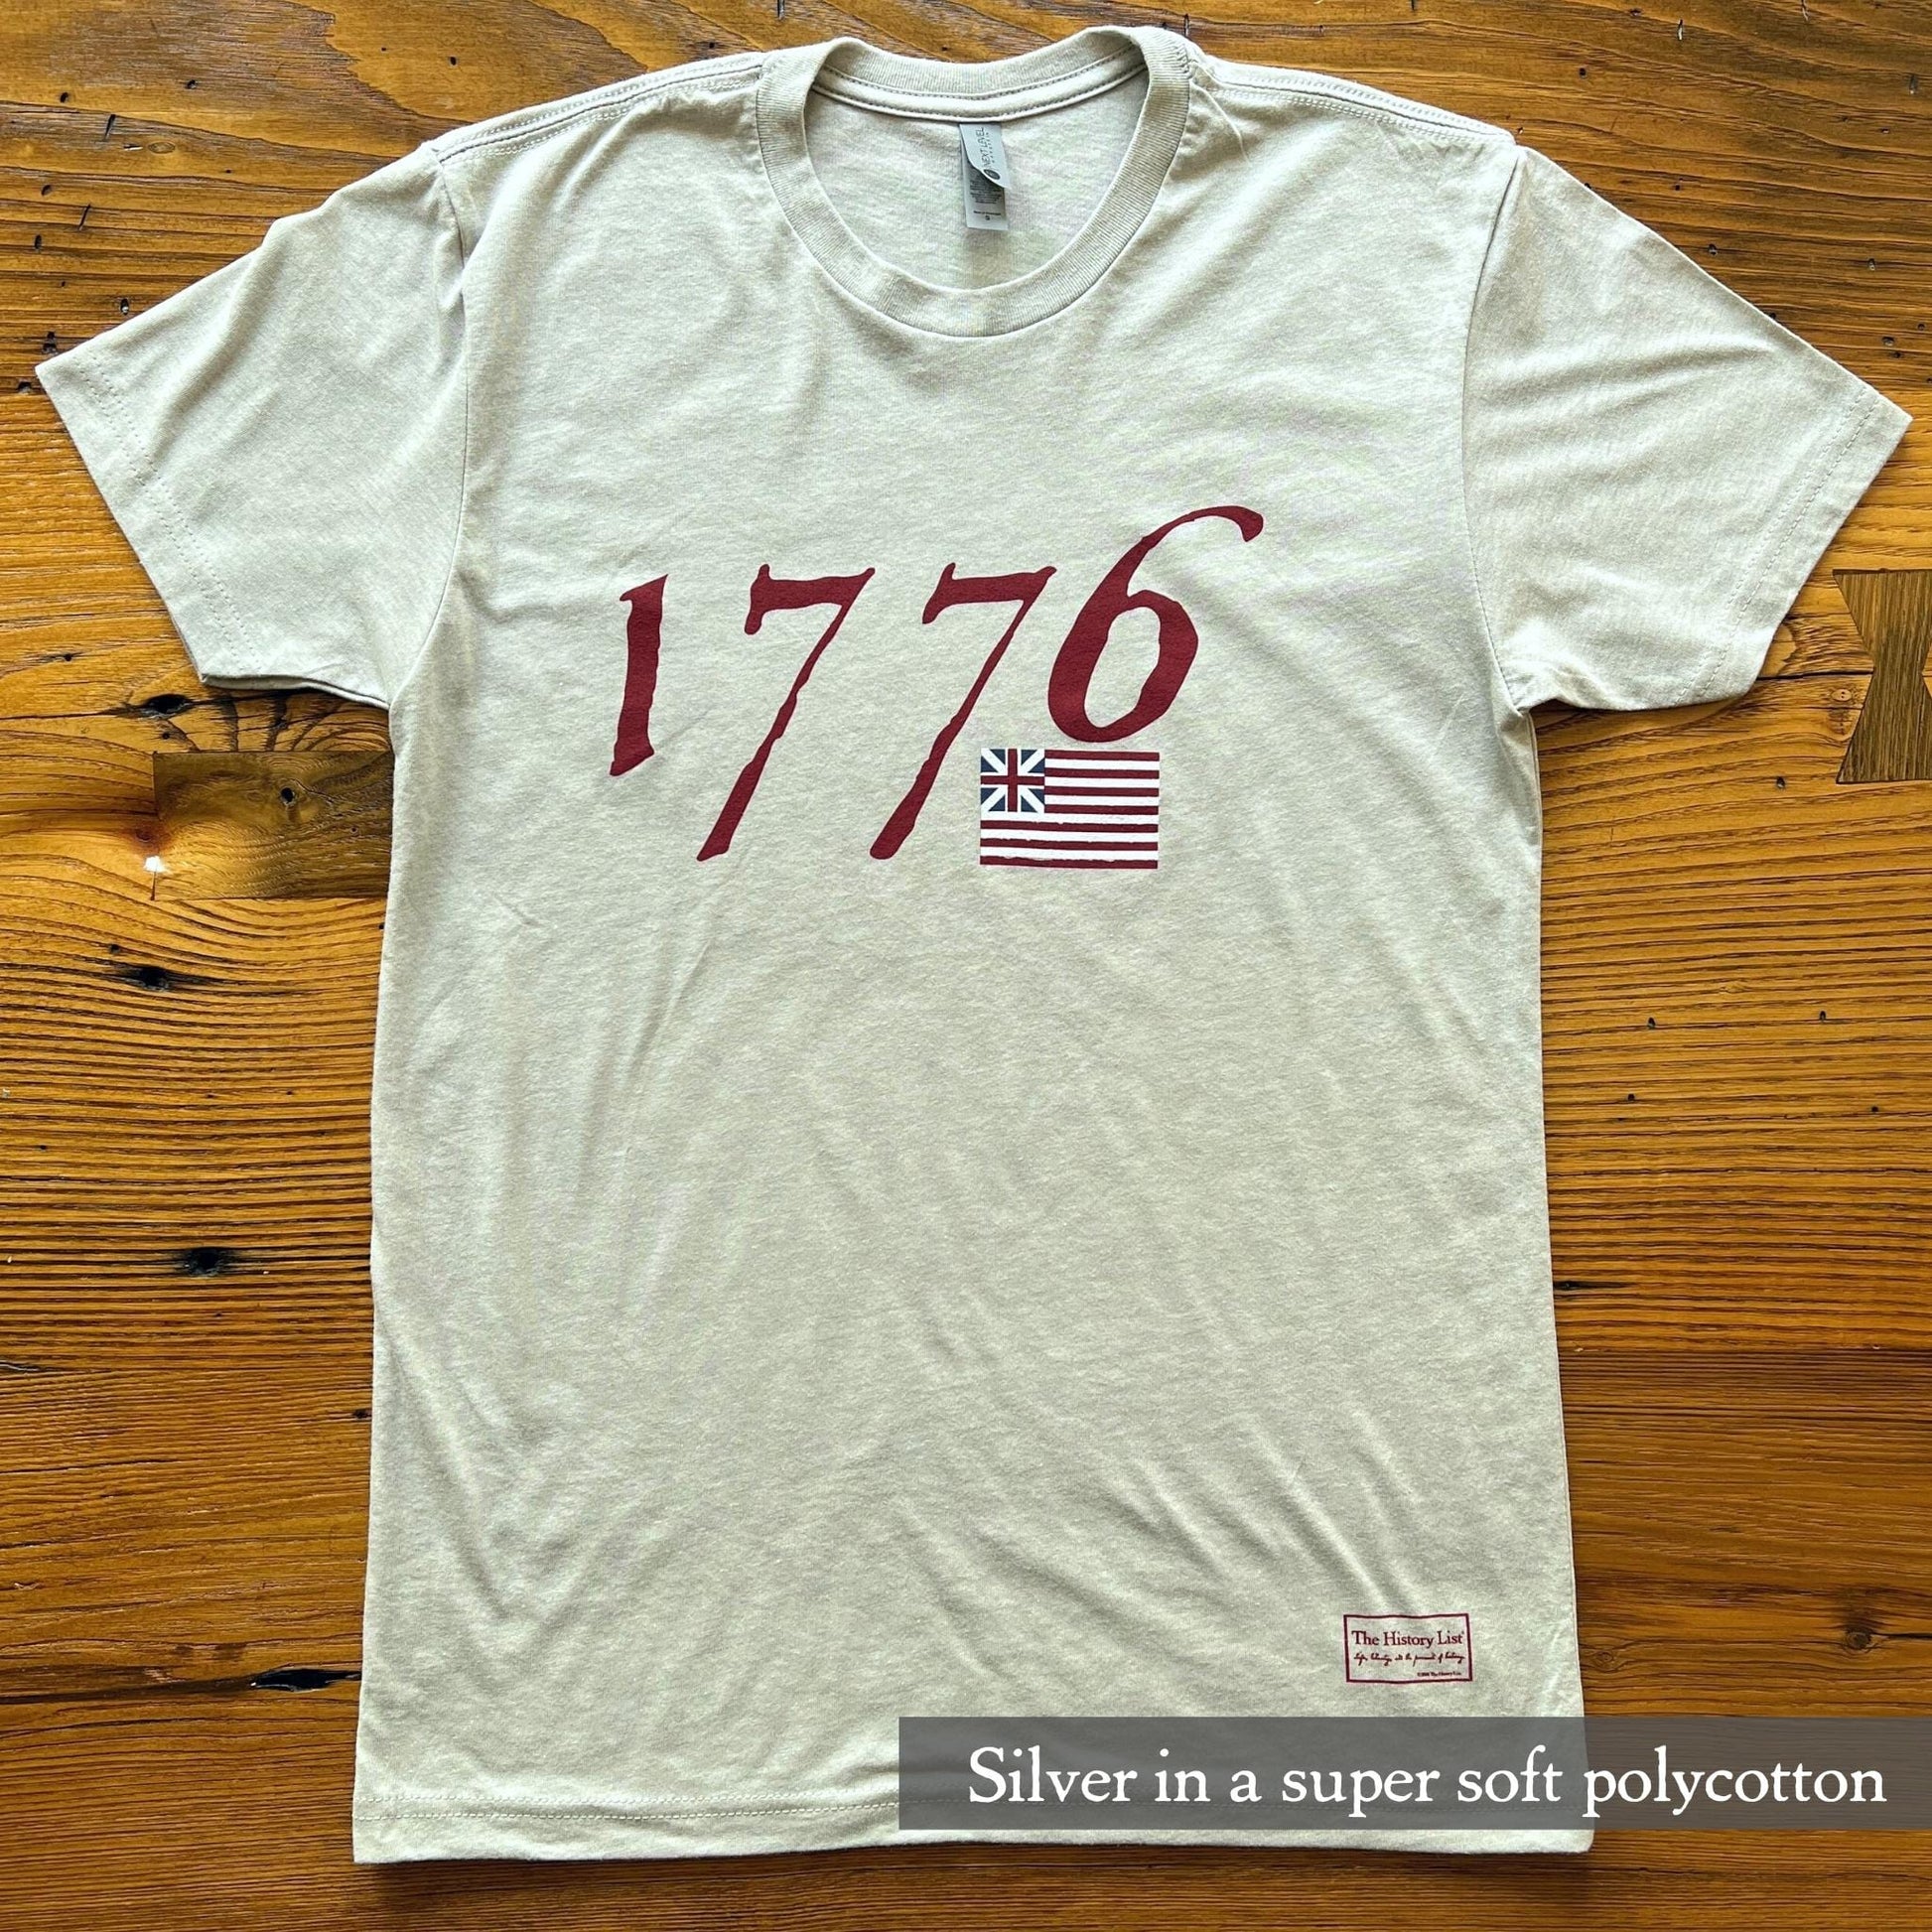 "We hold these truths - July 4, 1776” T-shirt from The History List store in Silver